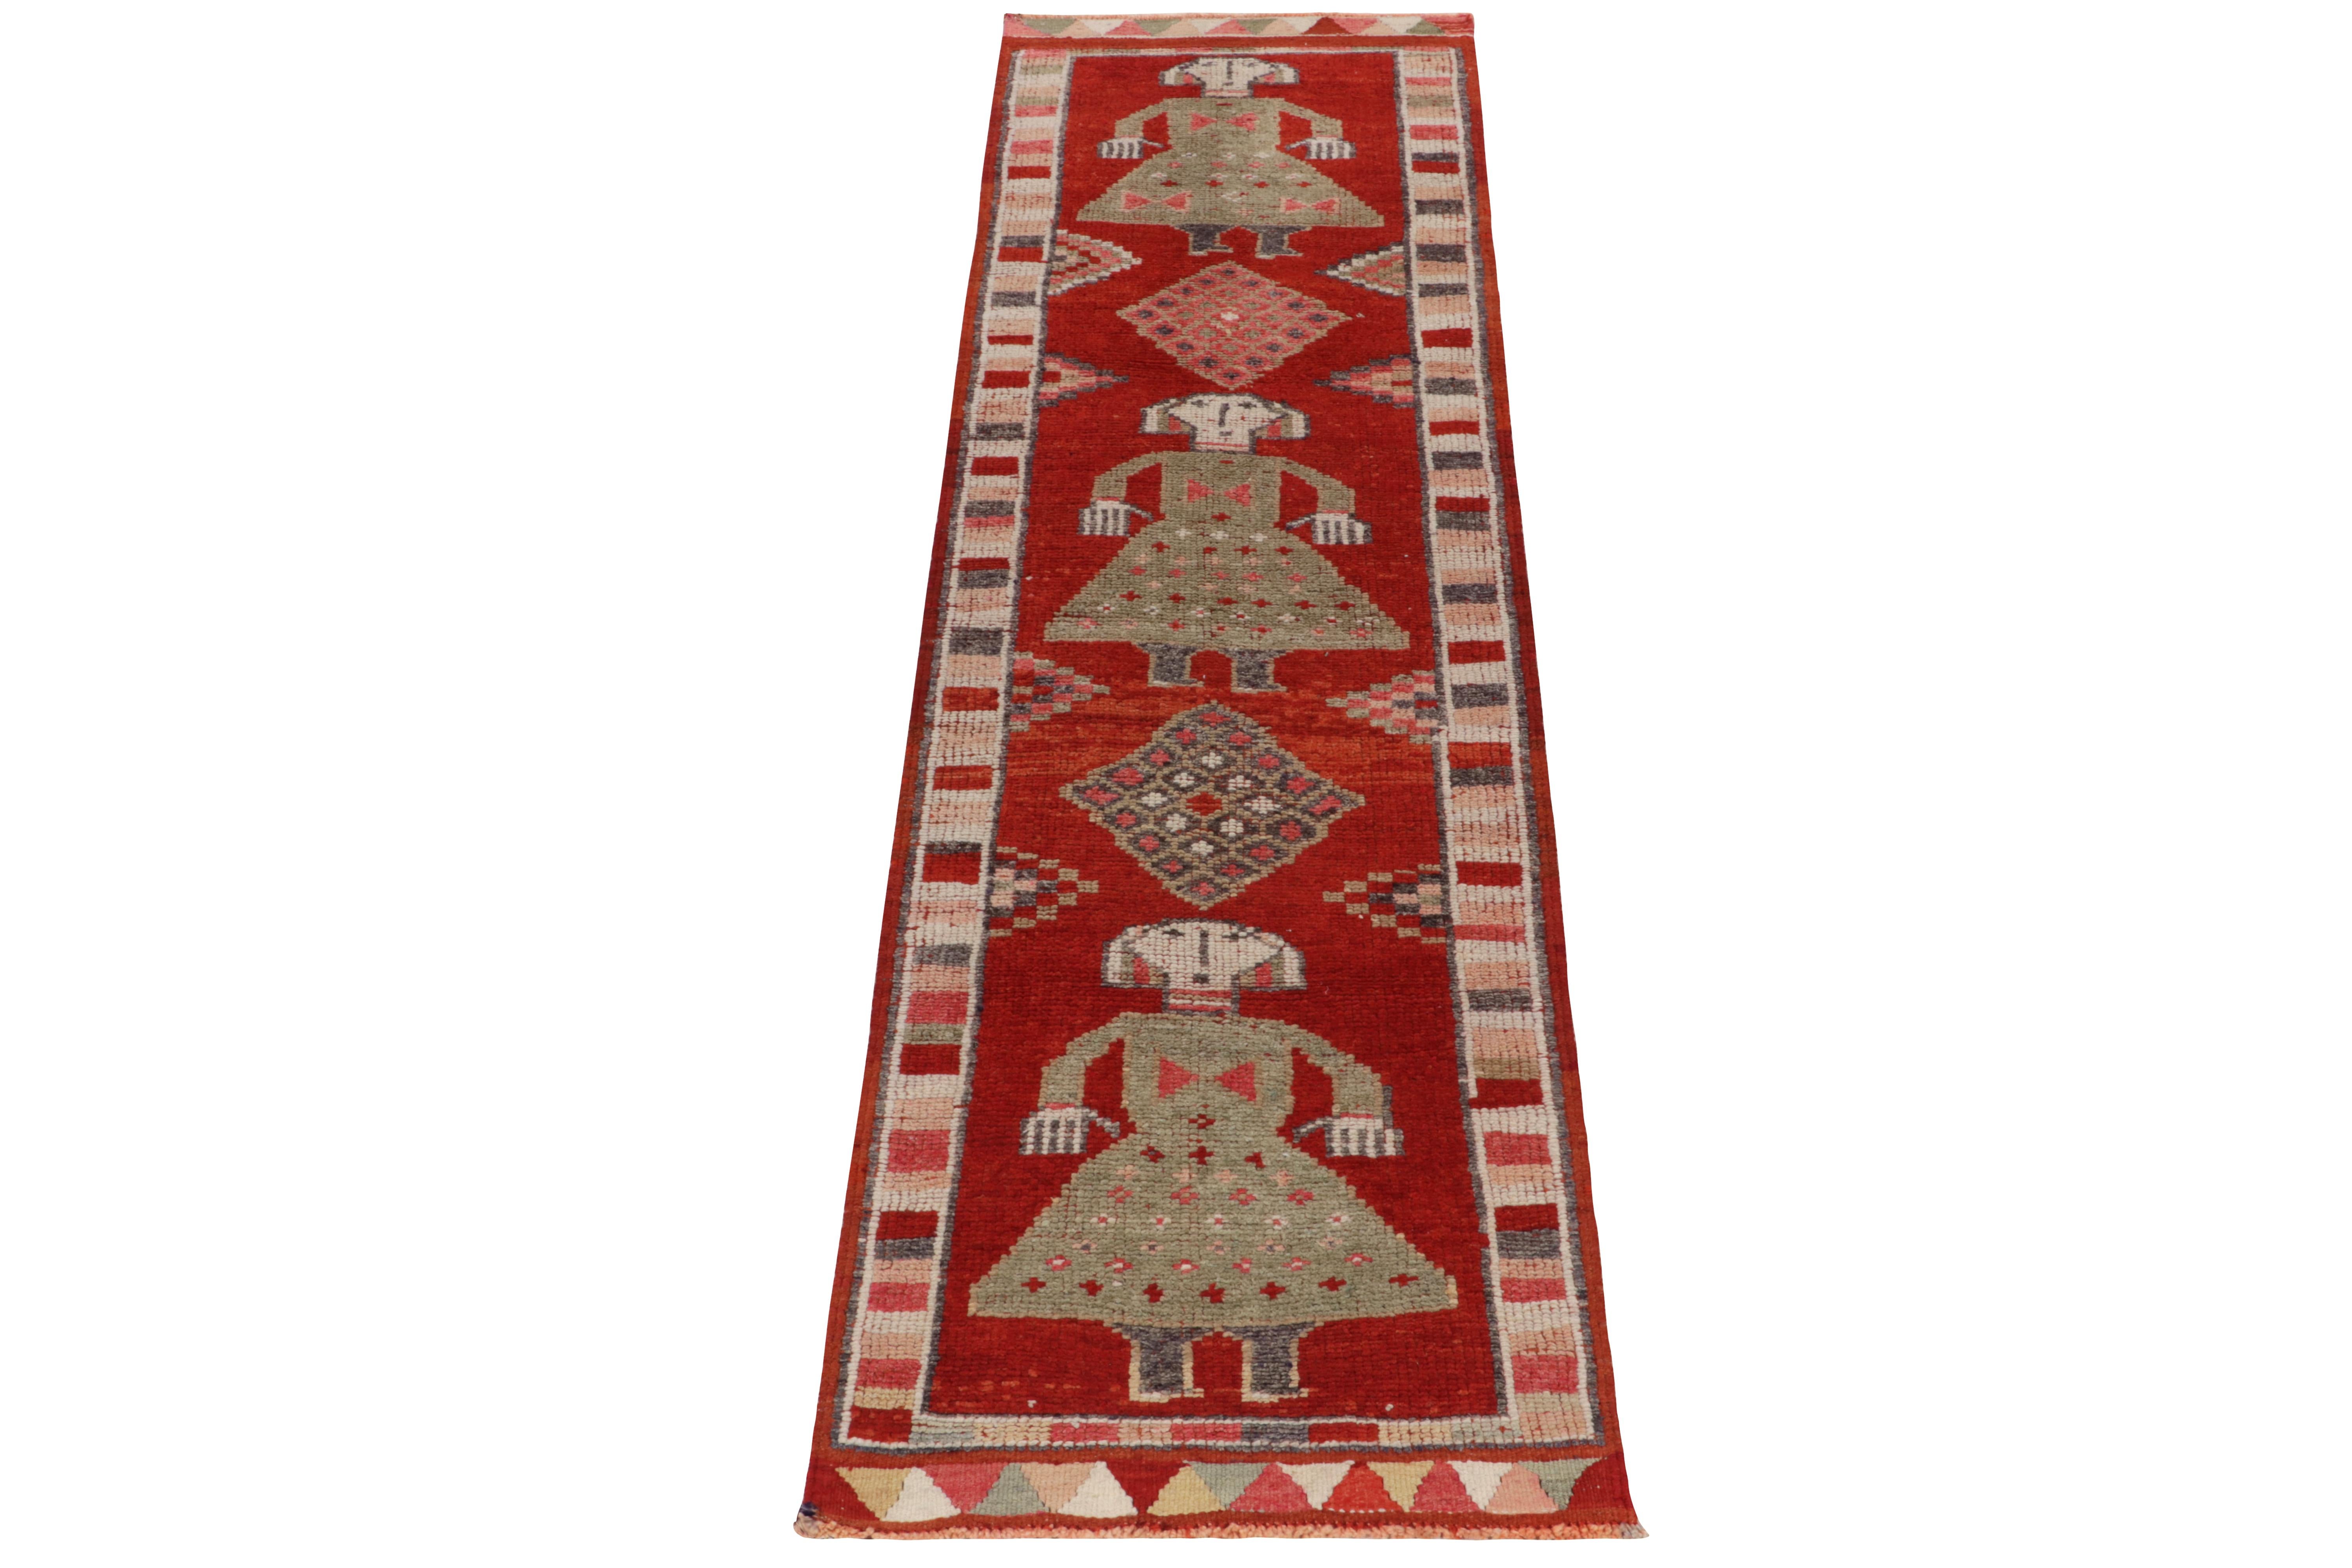 Hand-knotted in wool, a 3x11 runner from Rug & Kilim’s latest curation of rare tribal acquisitions. Originating from Turkey circa 1950-1960, as rare in pictorial design as it is versatile in its decorative size. 

The piece enjoys pictorials on